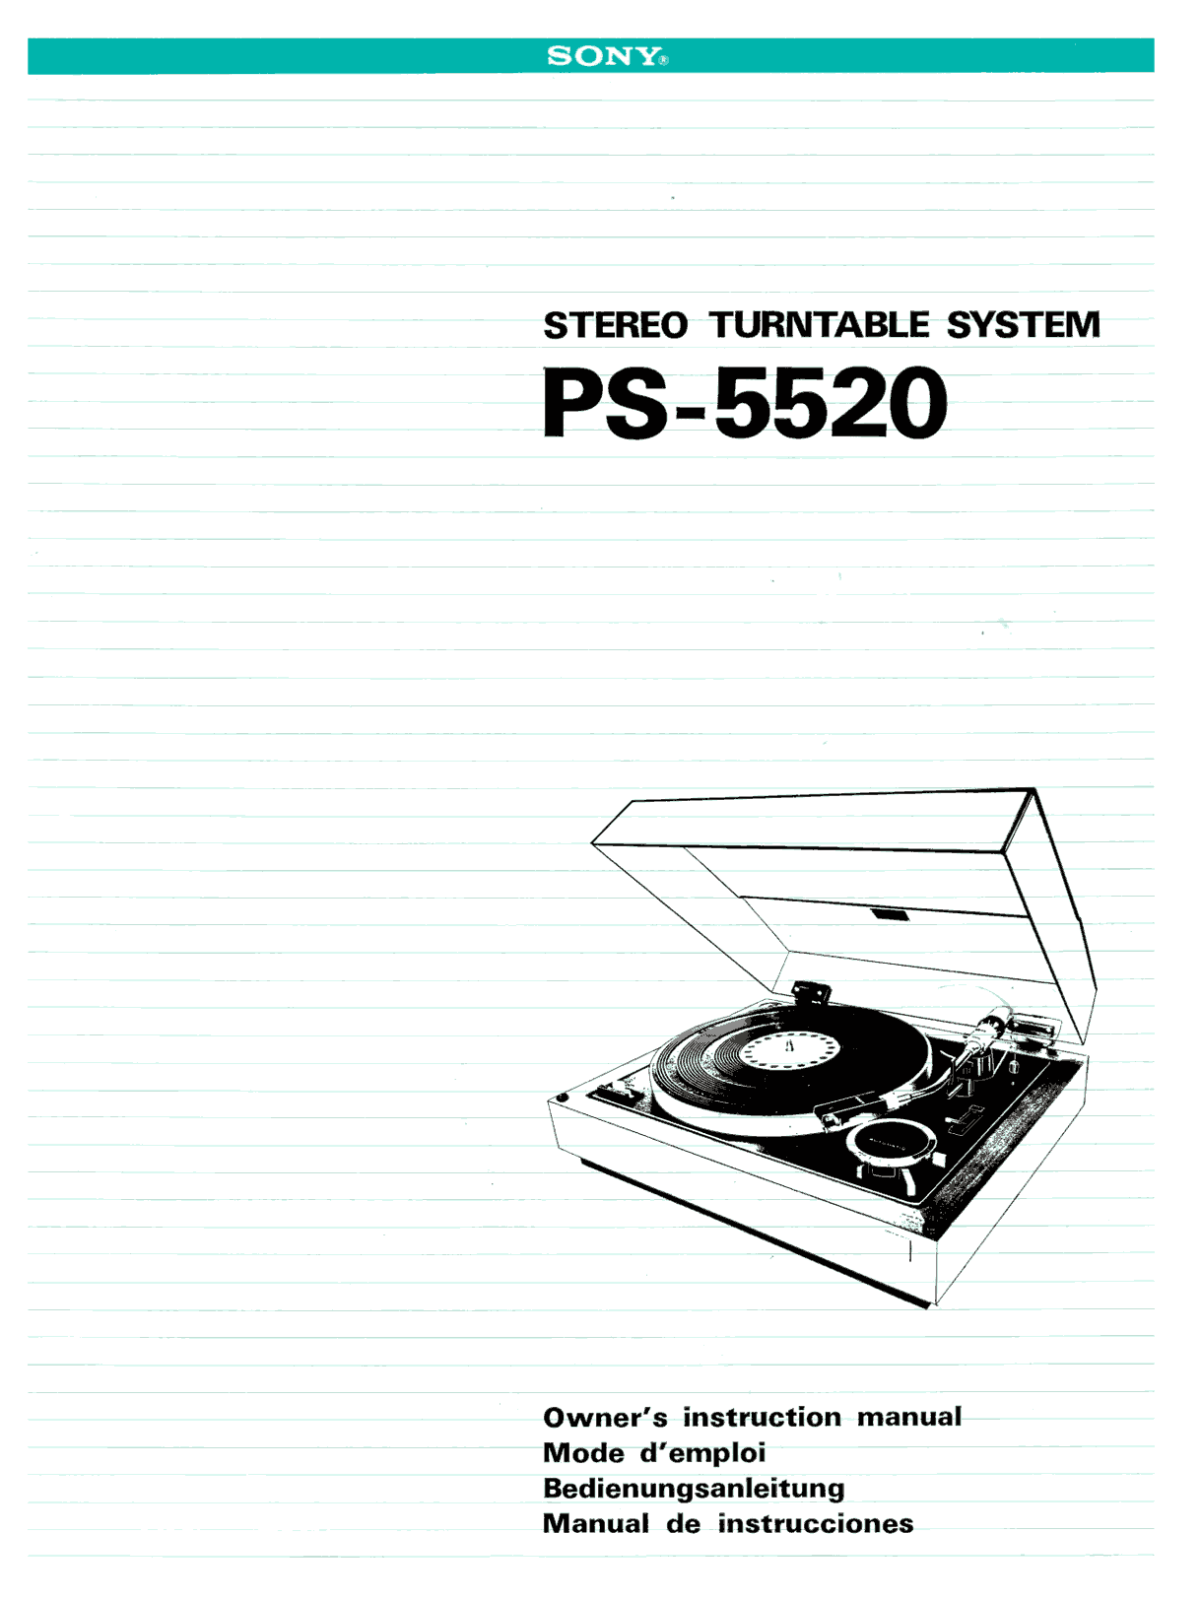 Sony PS-5520 Owners Manual